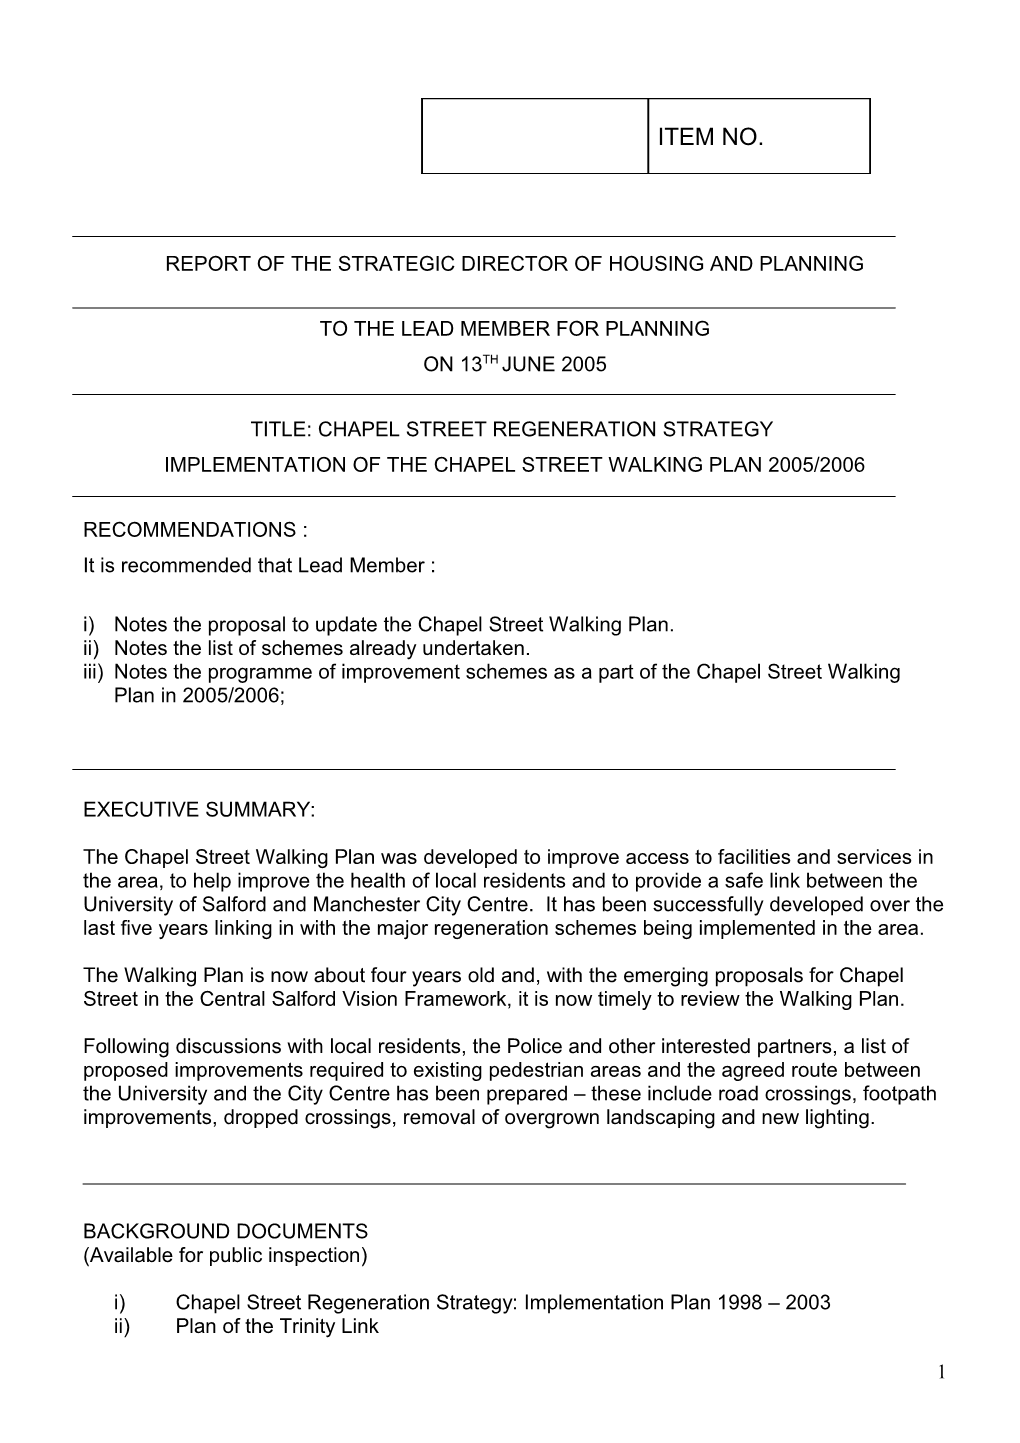 Report of the Strategic Director of Housing and Planning